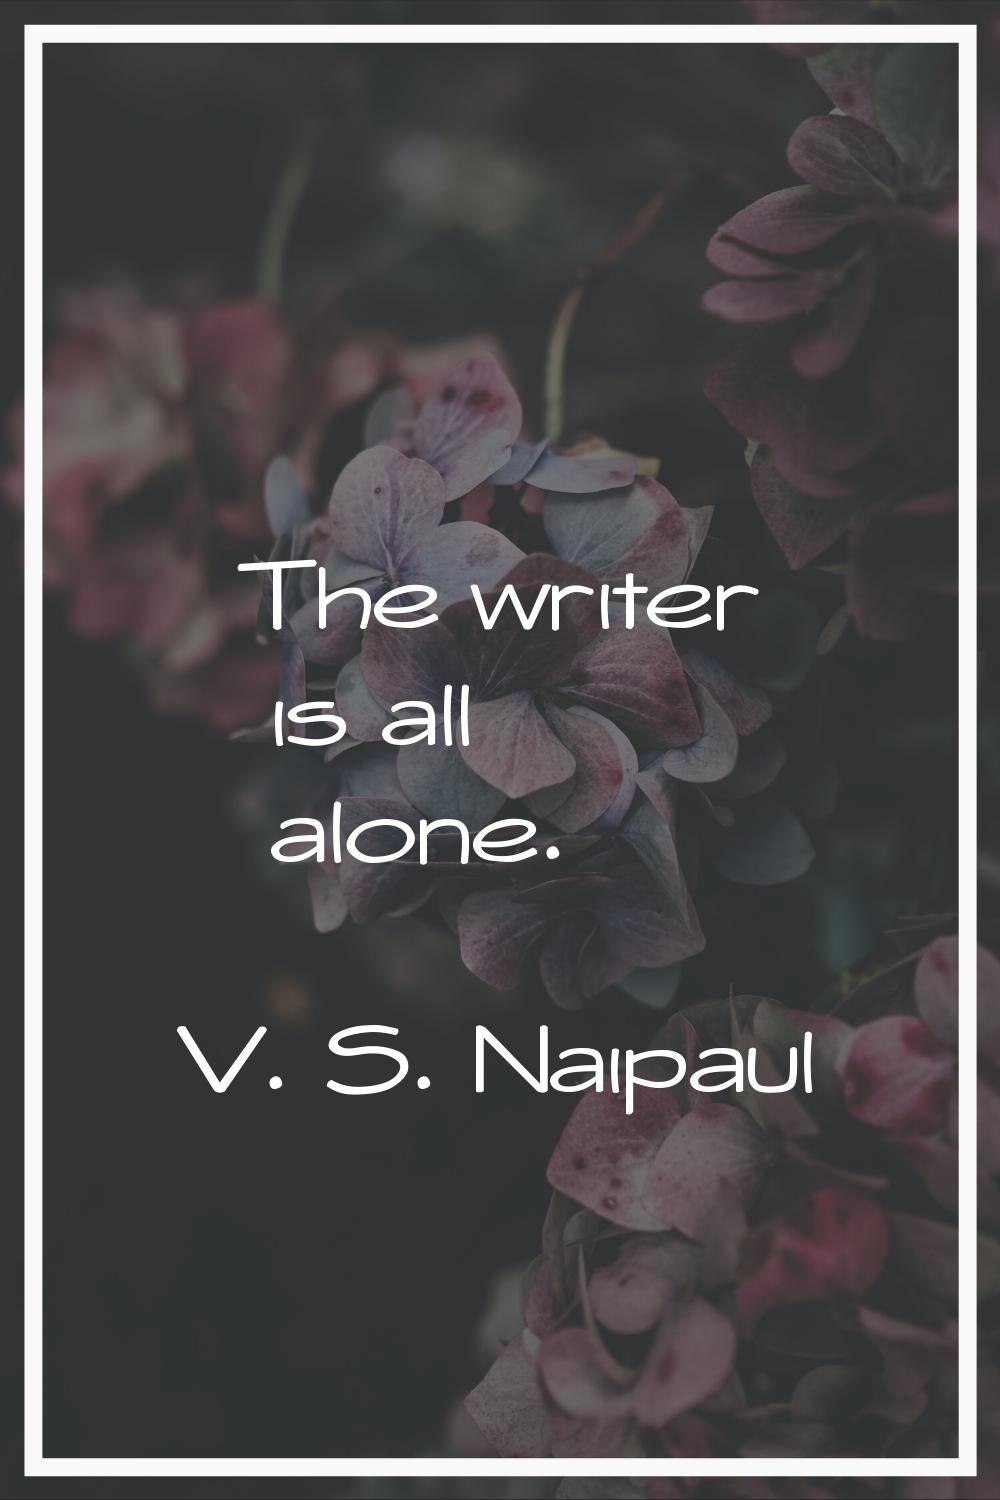 The writer is all alone.